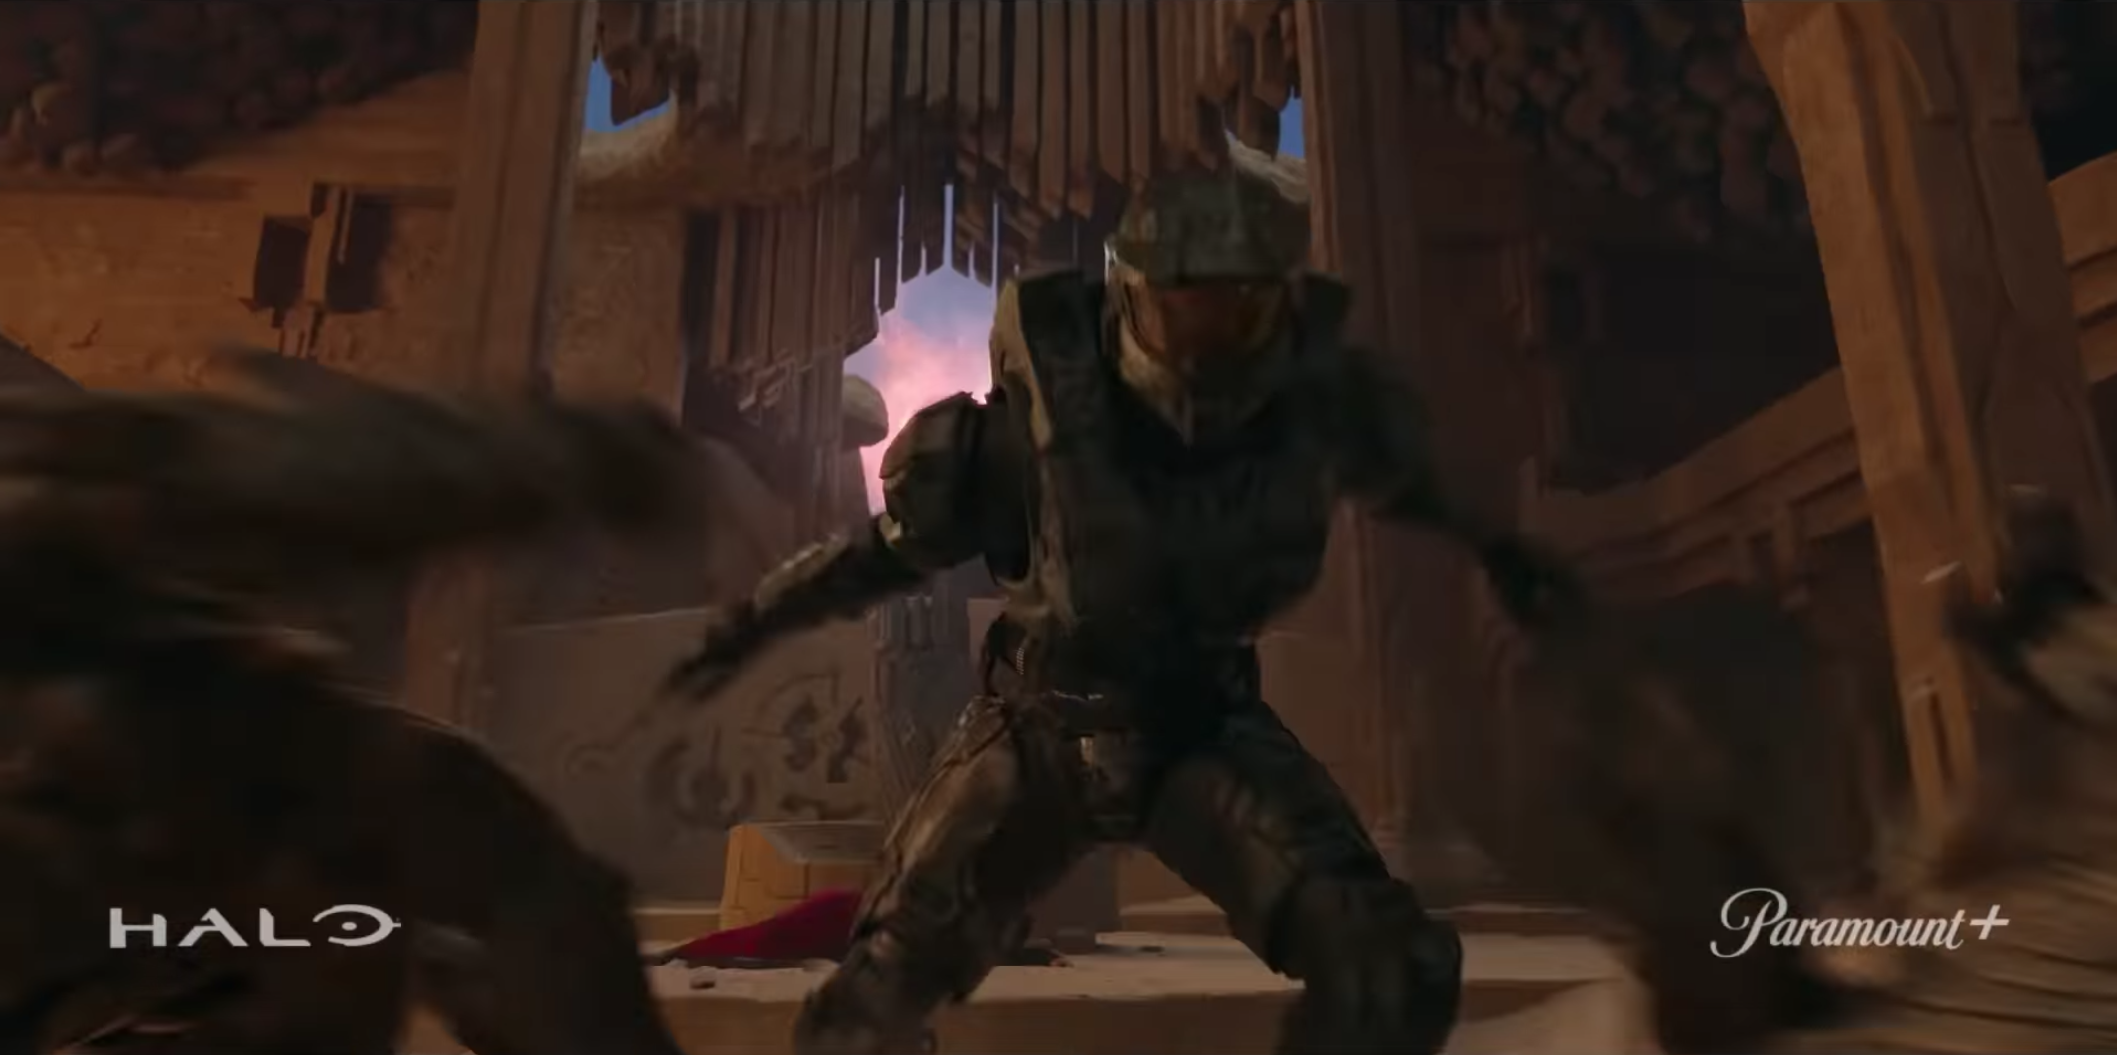 Halo S01 E09 Clip  'Only Master Chief and Silver Team Can Win The